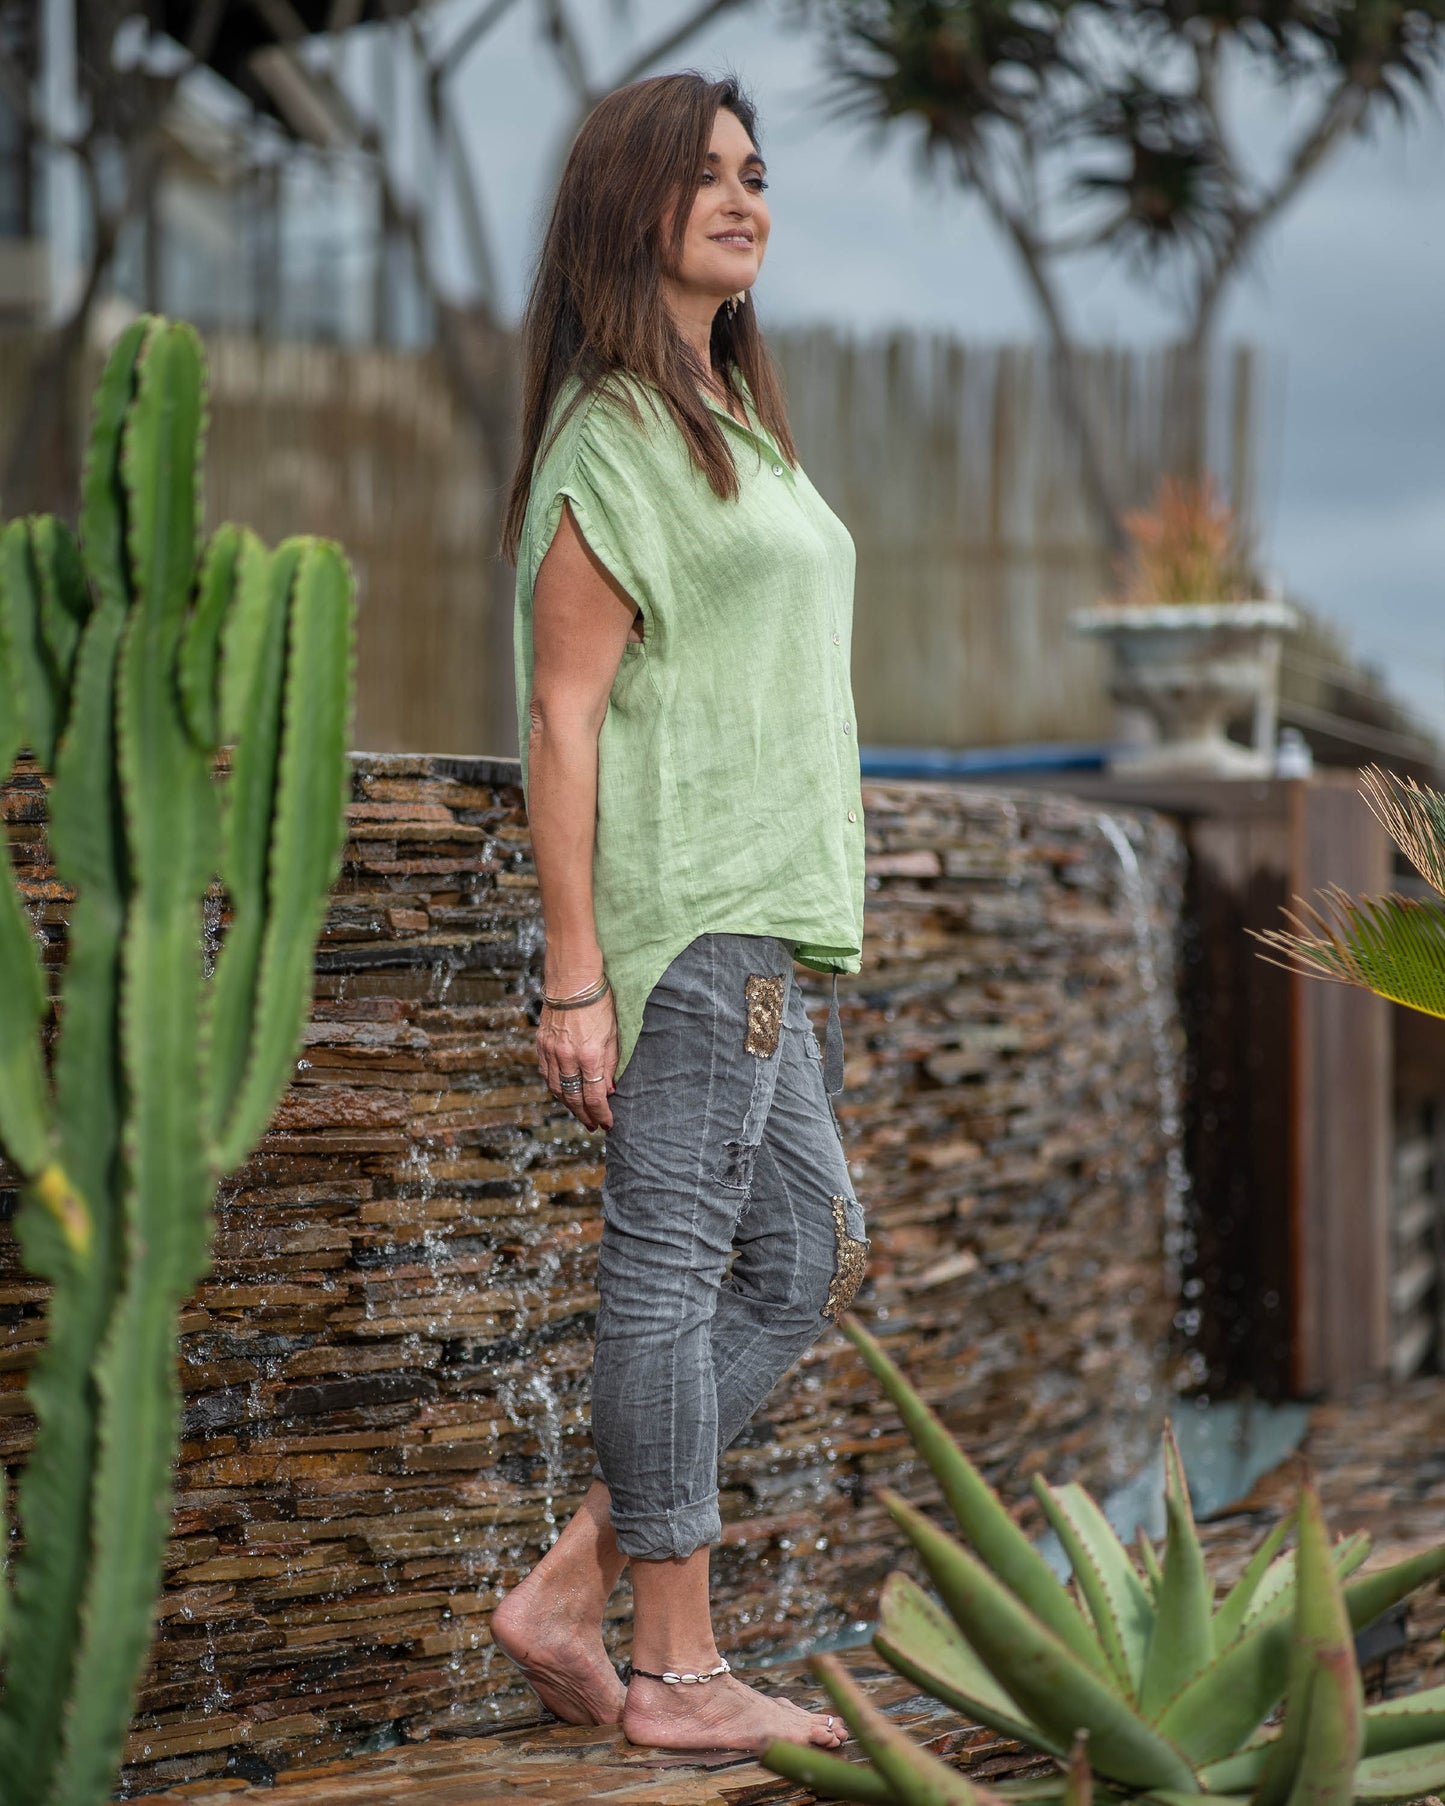 This sleeveless top embraces the breathability and natural texture of linen, ensuring you stay cool and comfortable all day long. The wide cut design provides a relaxed and flowy silhouette. With a button-up front and a stylish collar, this top offers a touch of modern elegance. You can also add a front knot for a more playful look